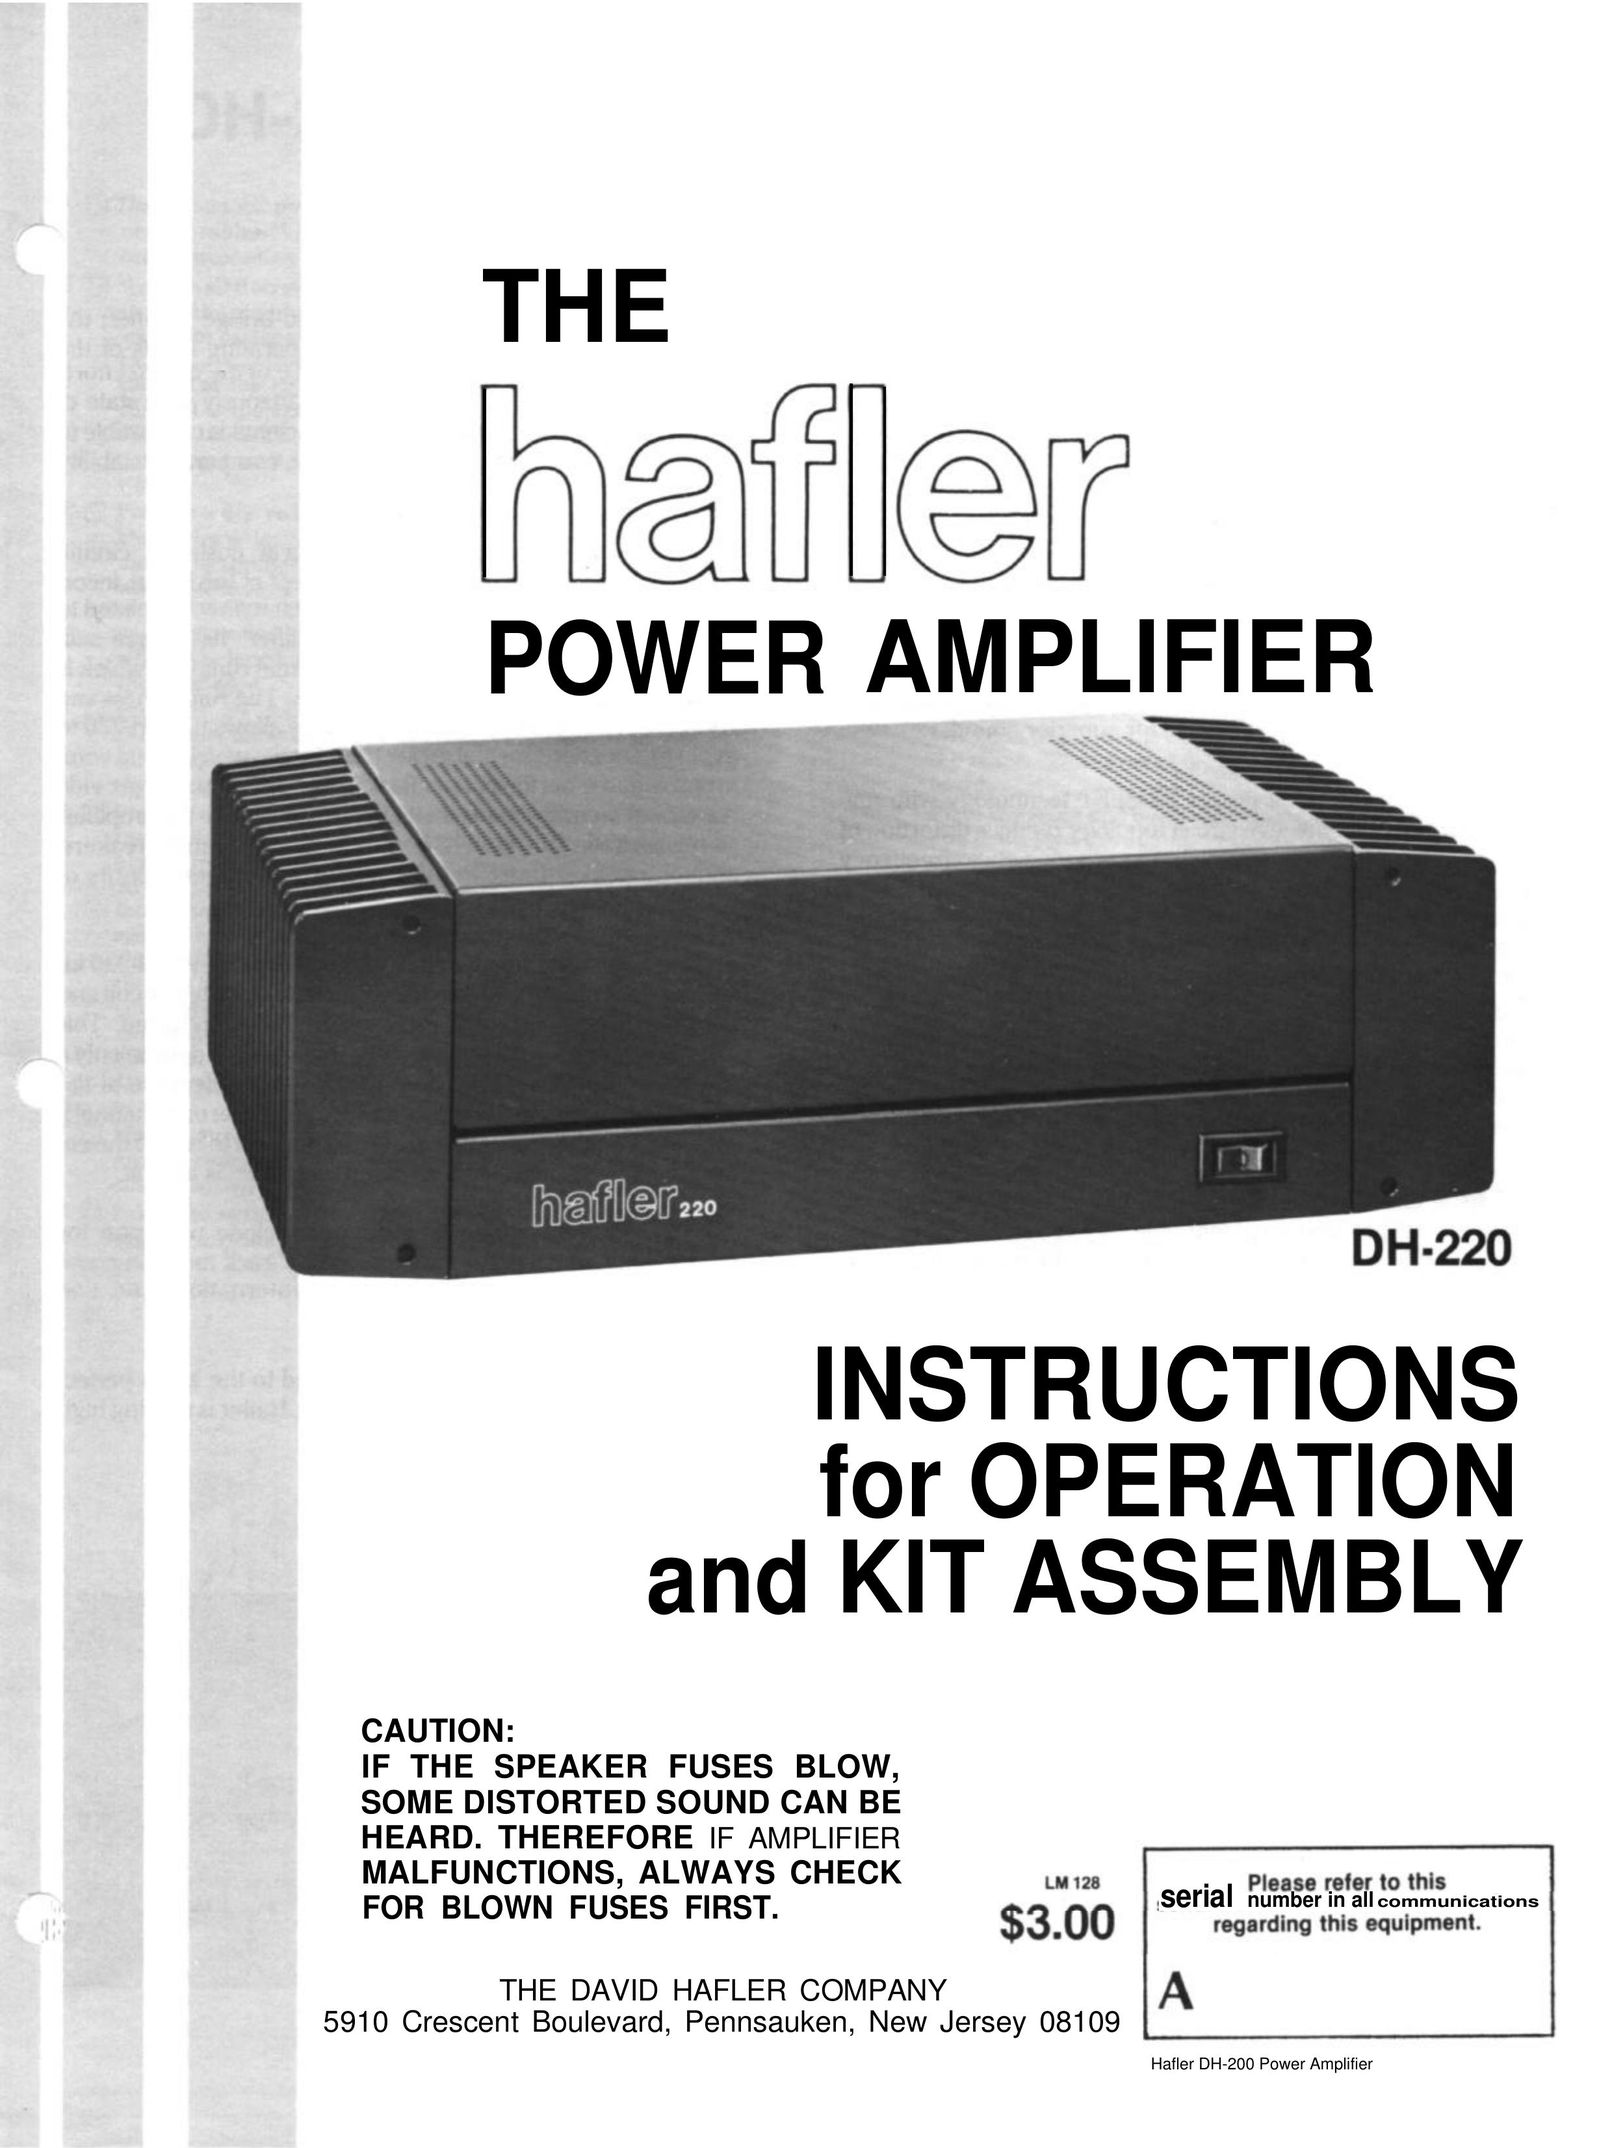 Hafler DH-200 Stereo Amplifier User Manual (Page 1)